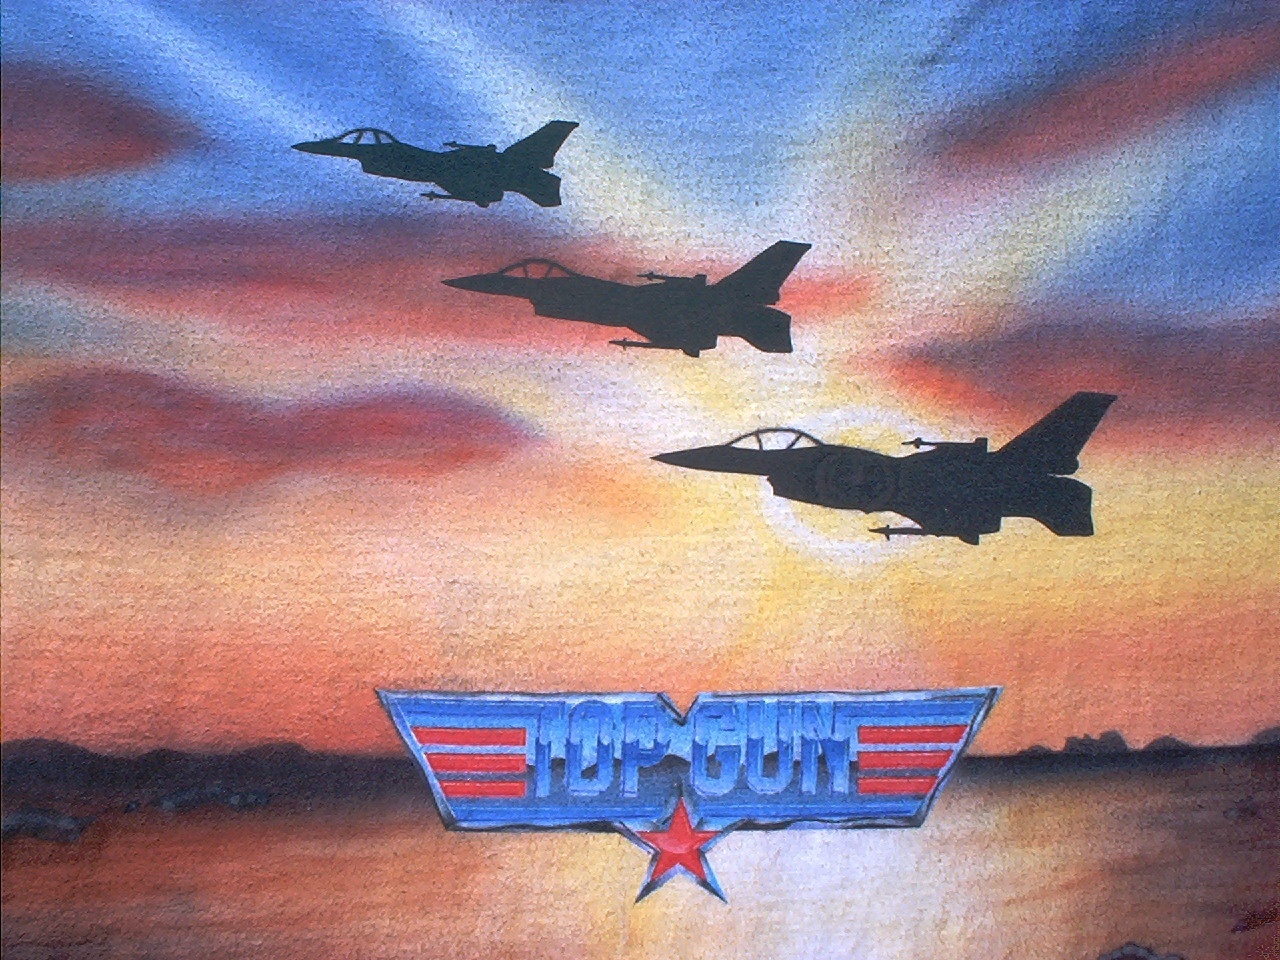 Top Gun front three fighters and logo.closeup